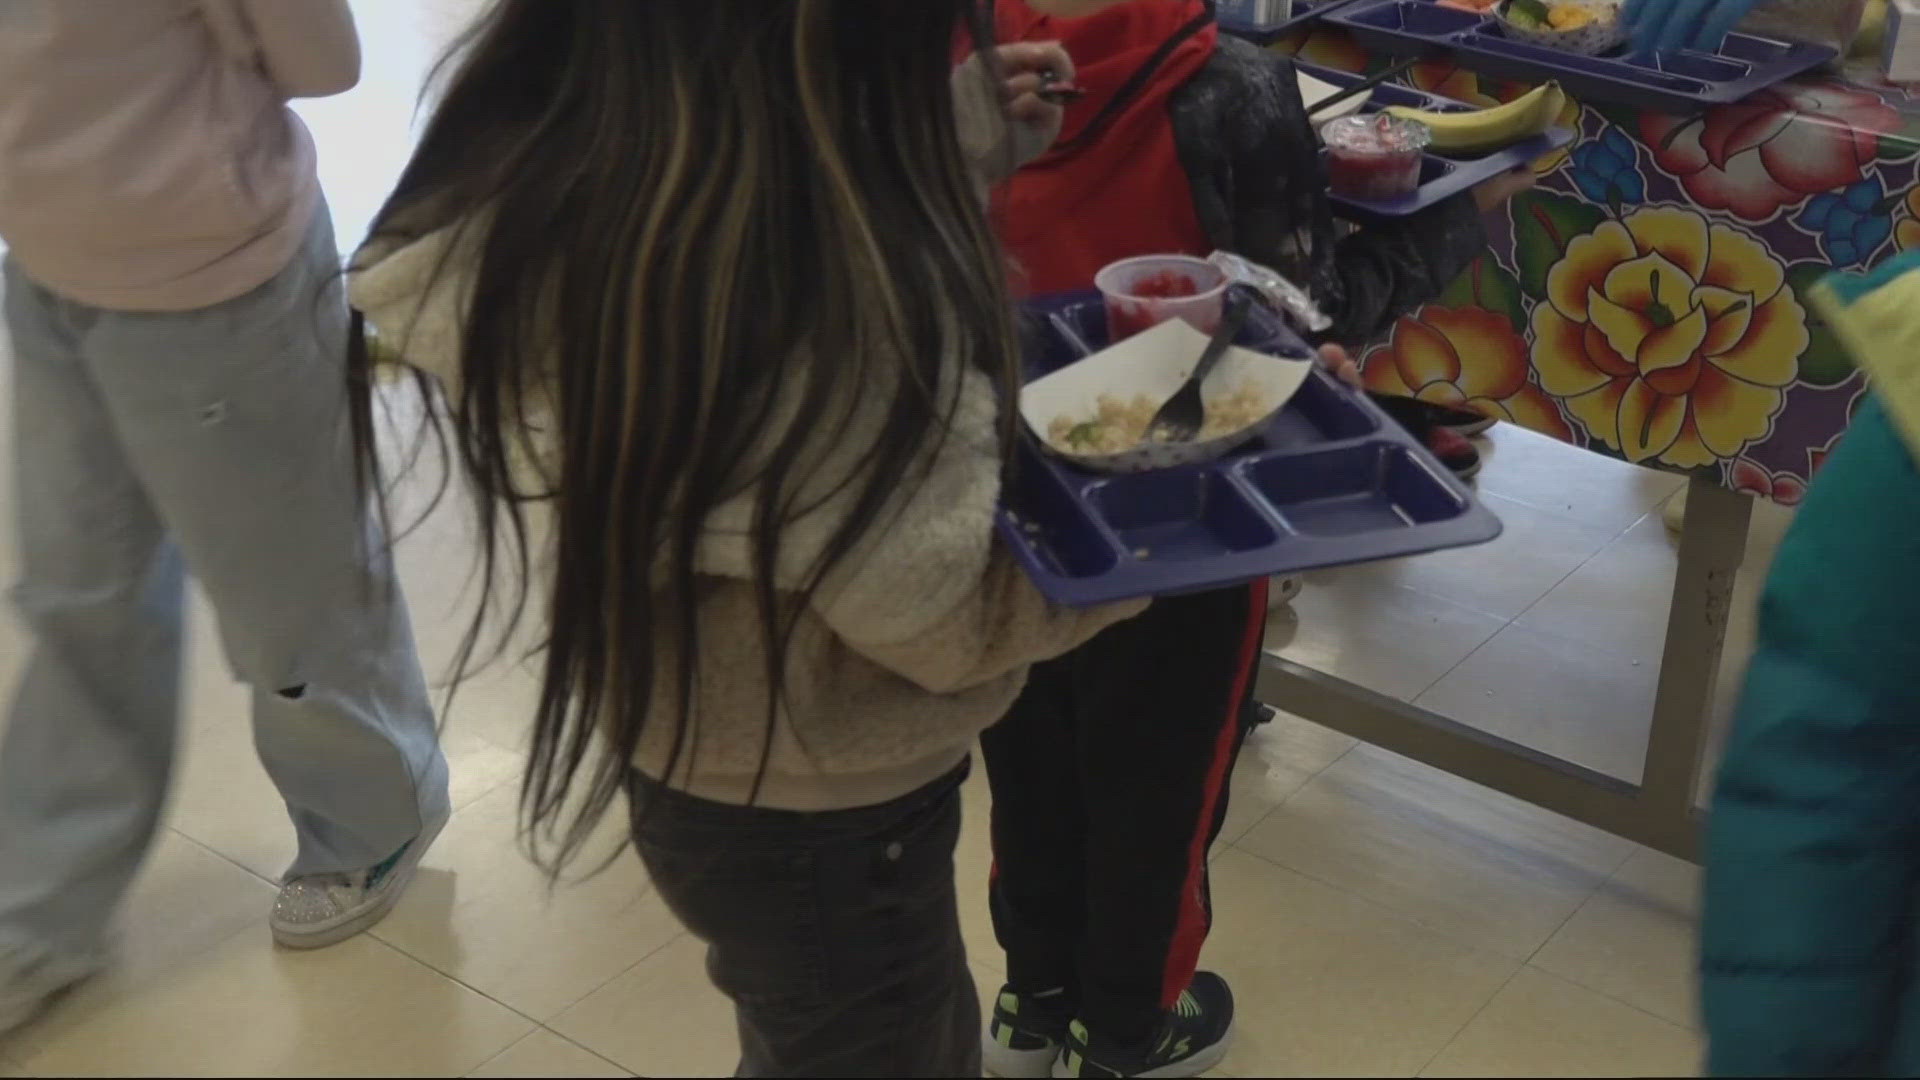 Researchers agree that Oregon schools offering universal free meals make a difference in reducing stigmas and disruptions.